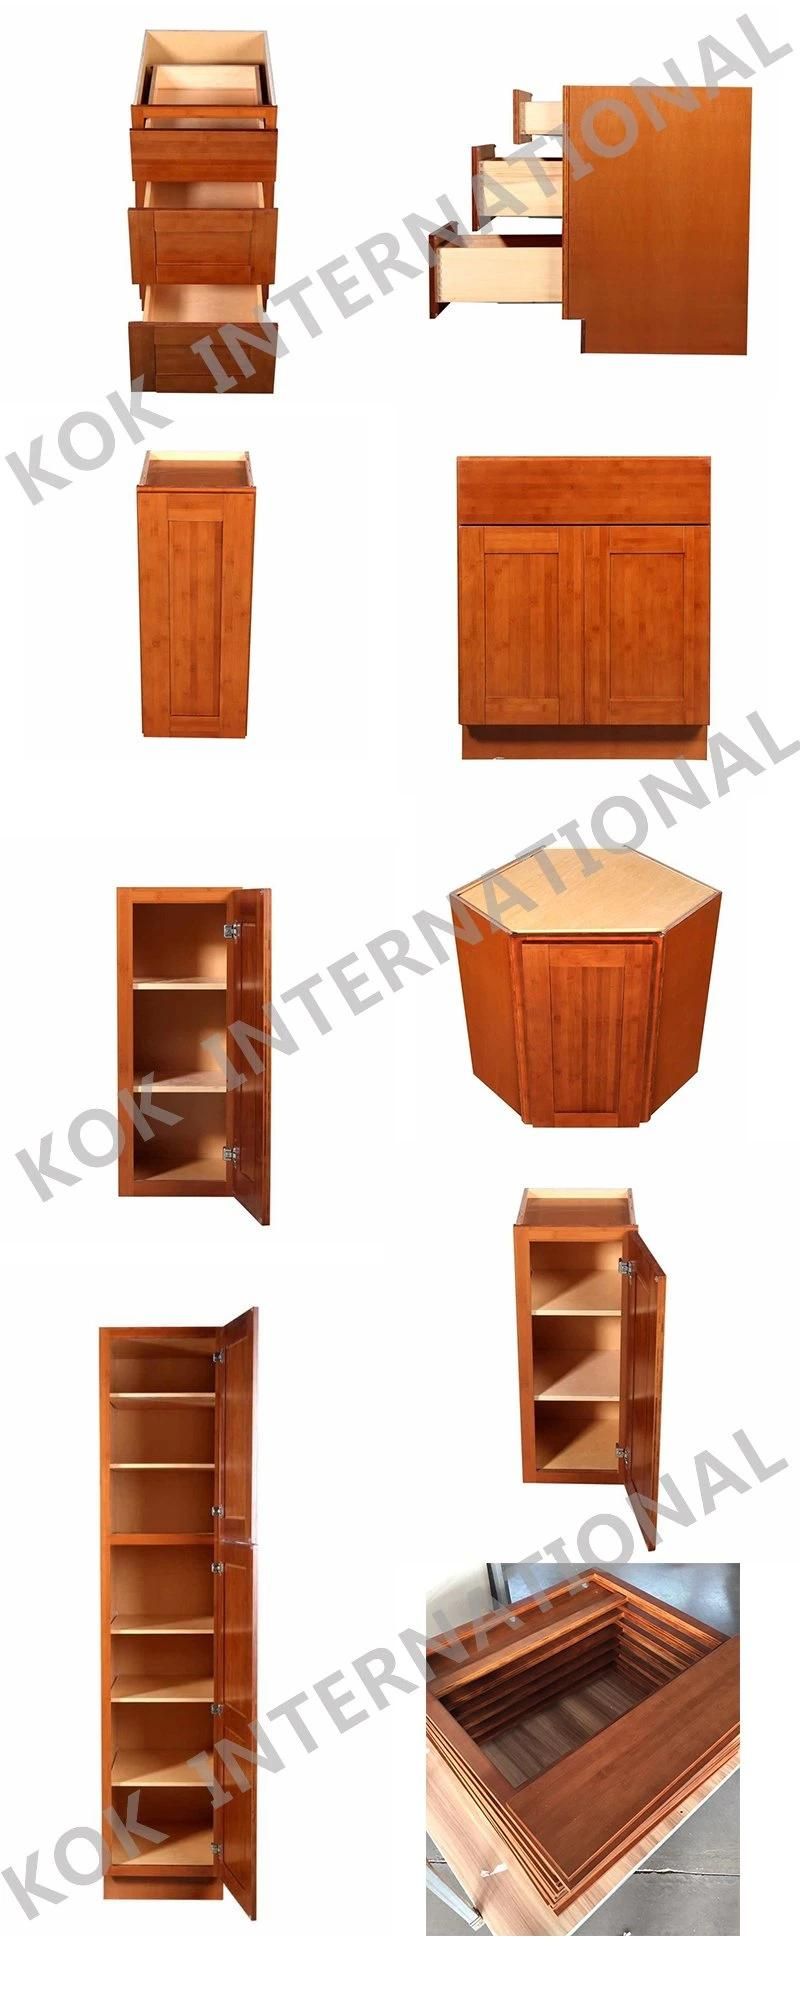 American Style Kitchen Cabinet Bamboo Shakerb30